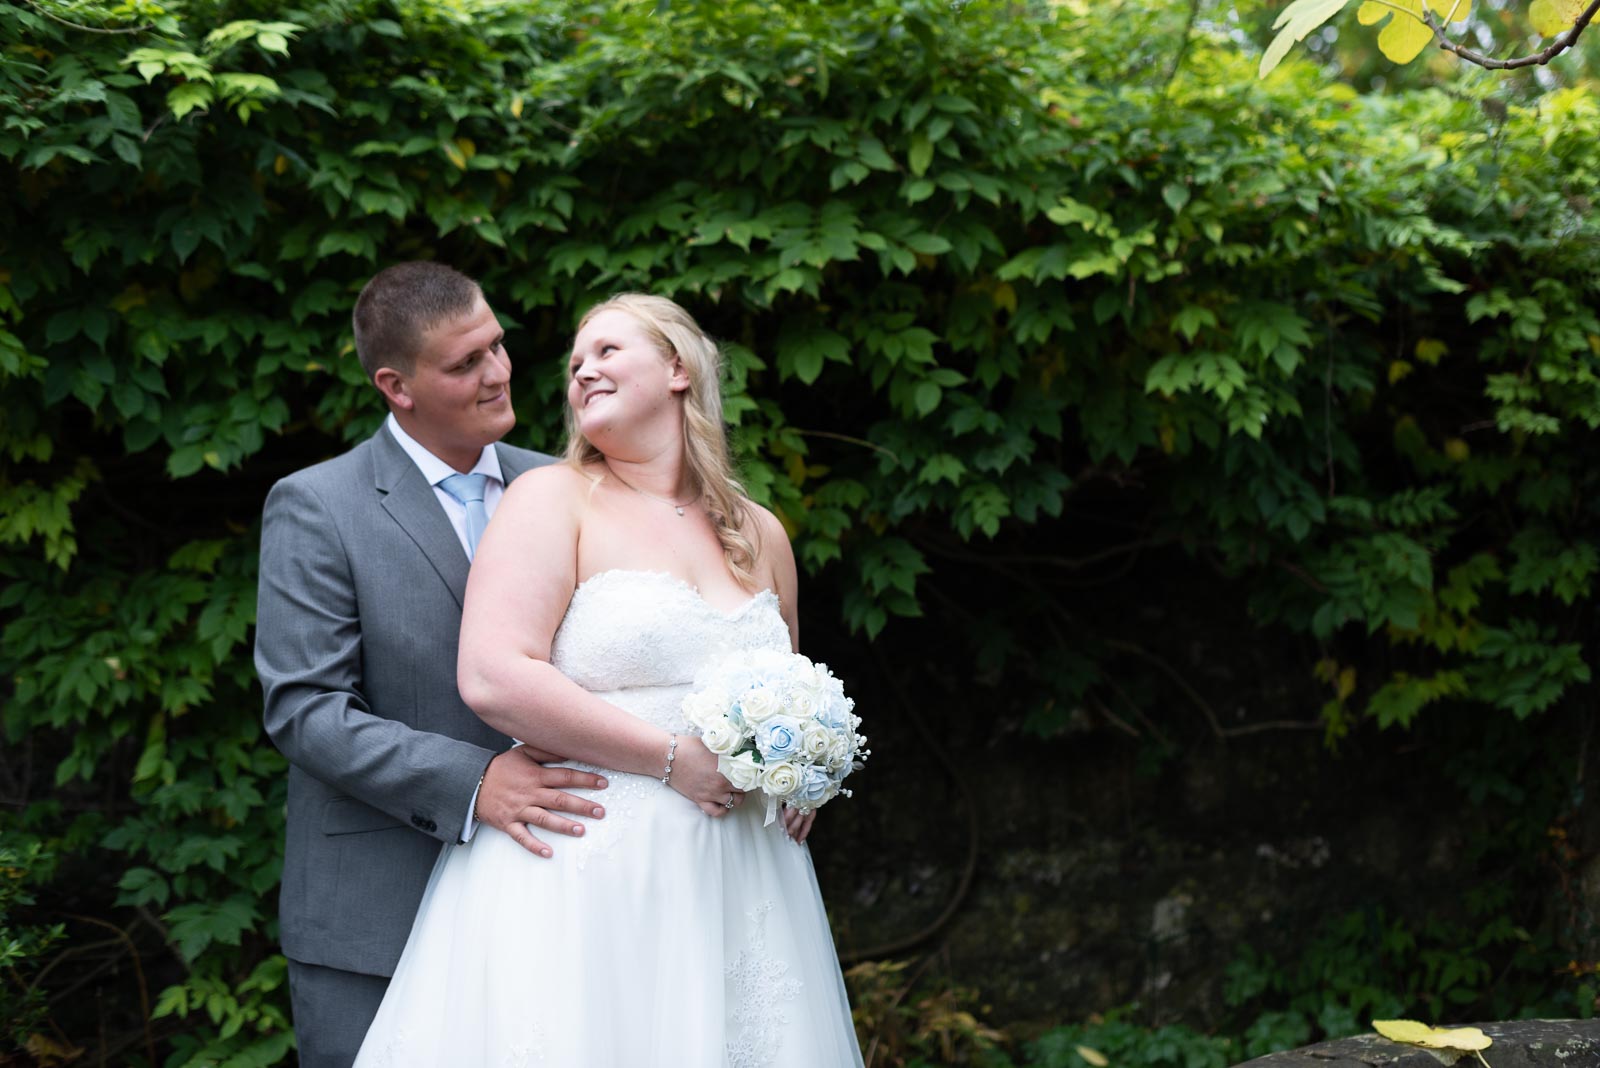 Eliana and Jacob enjoy a moment looking at eachother in Southover Grange after their wedding at Lewes Register Office.